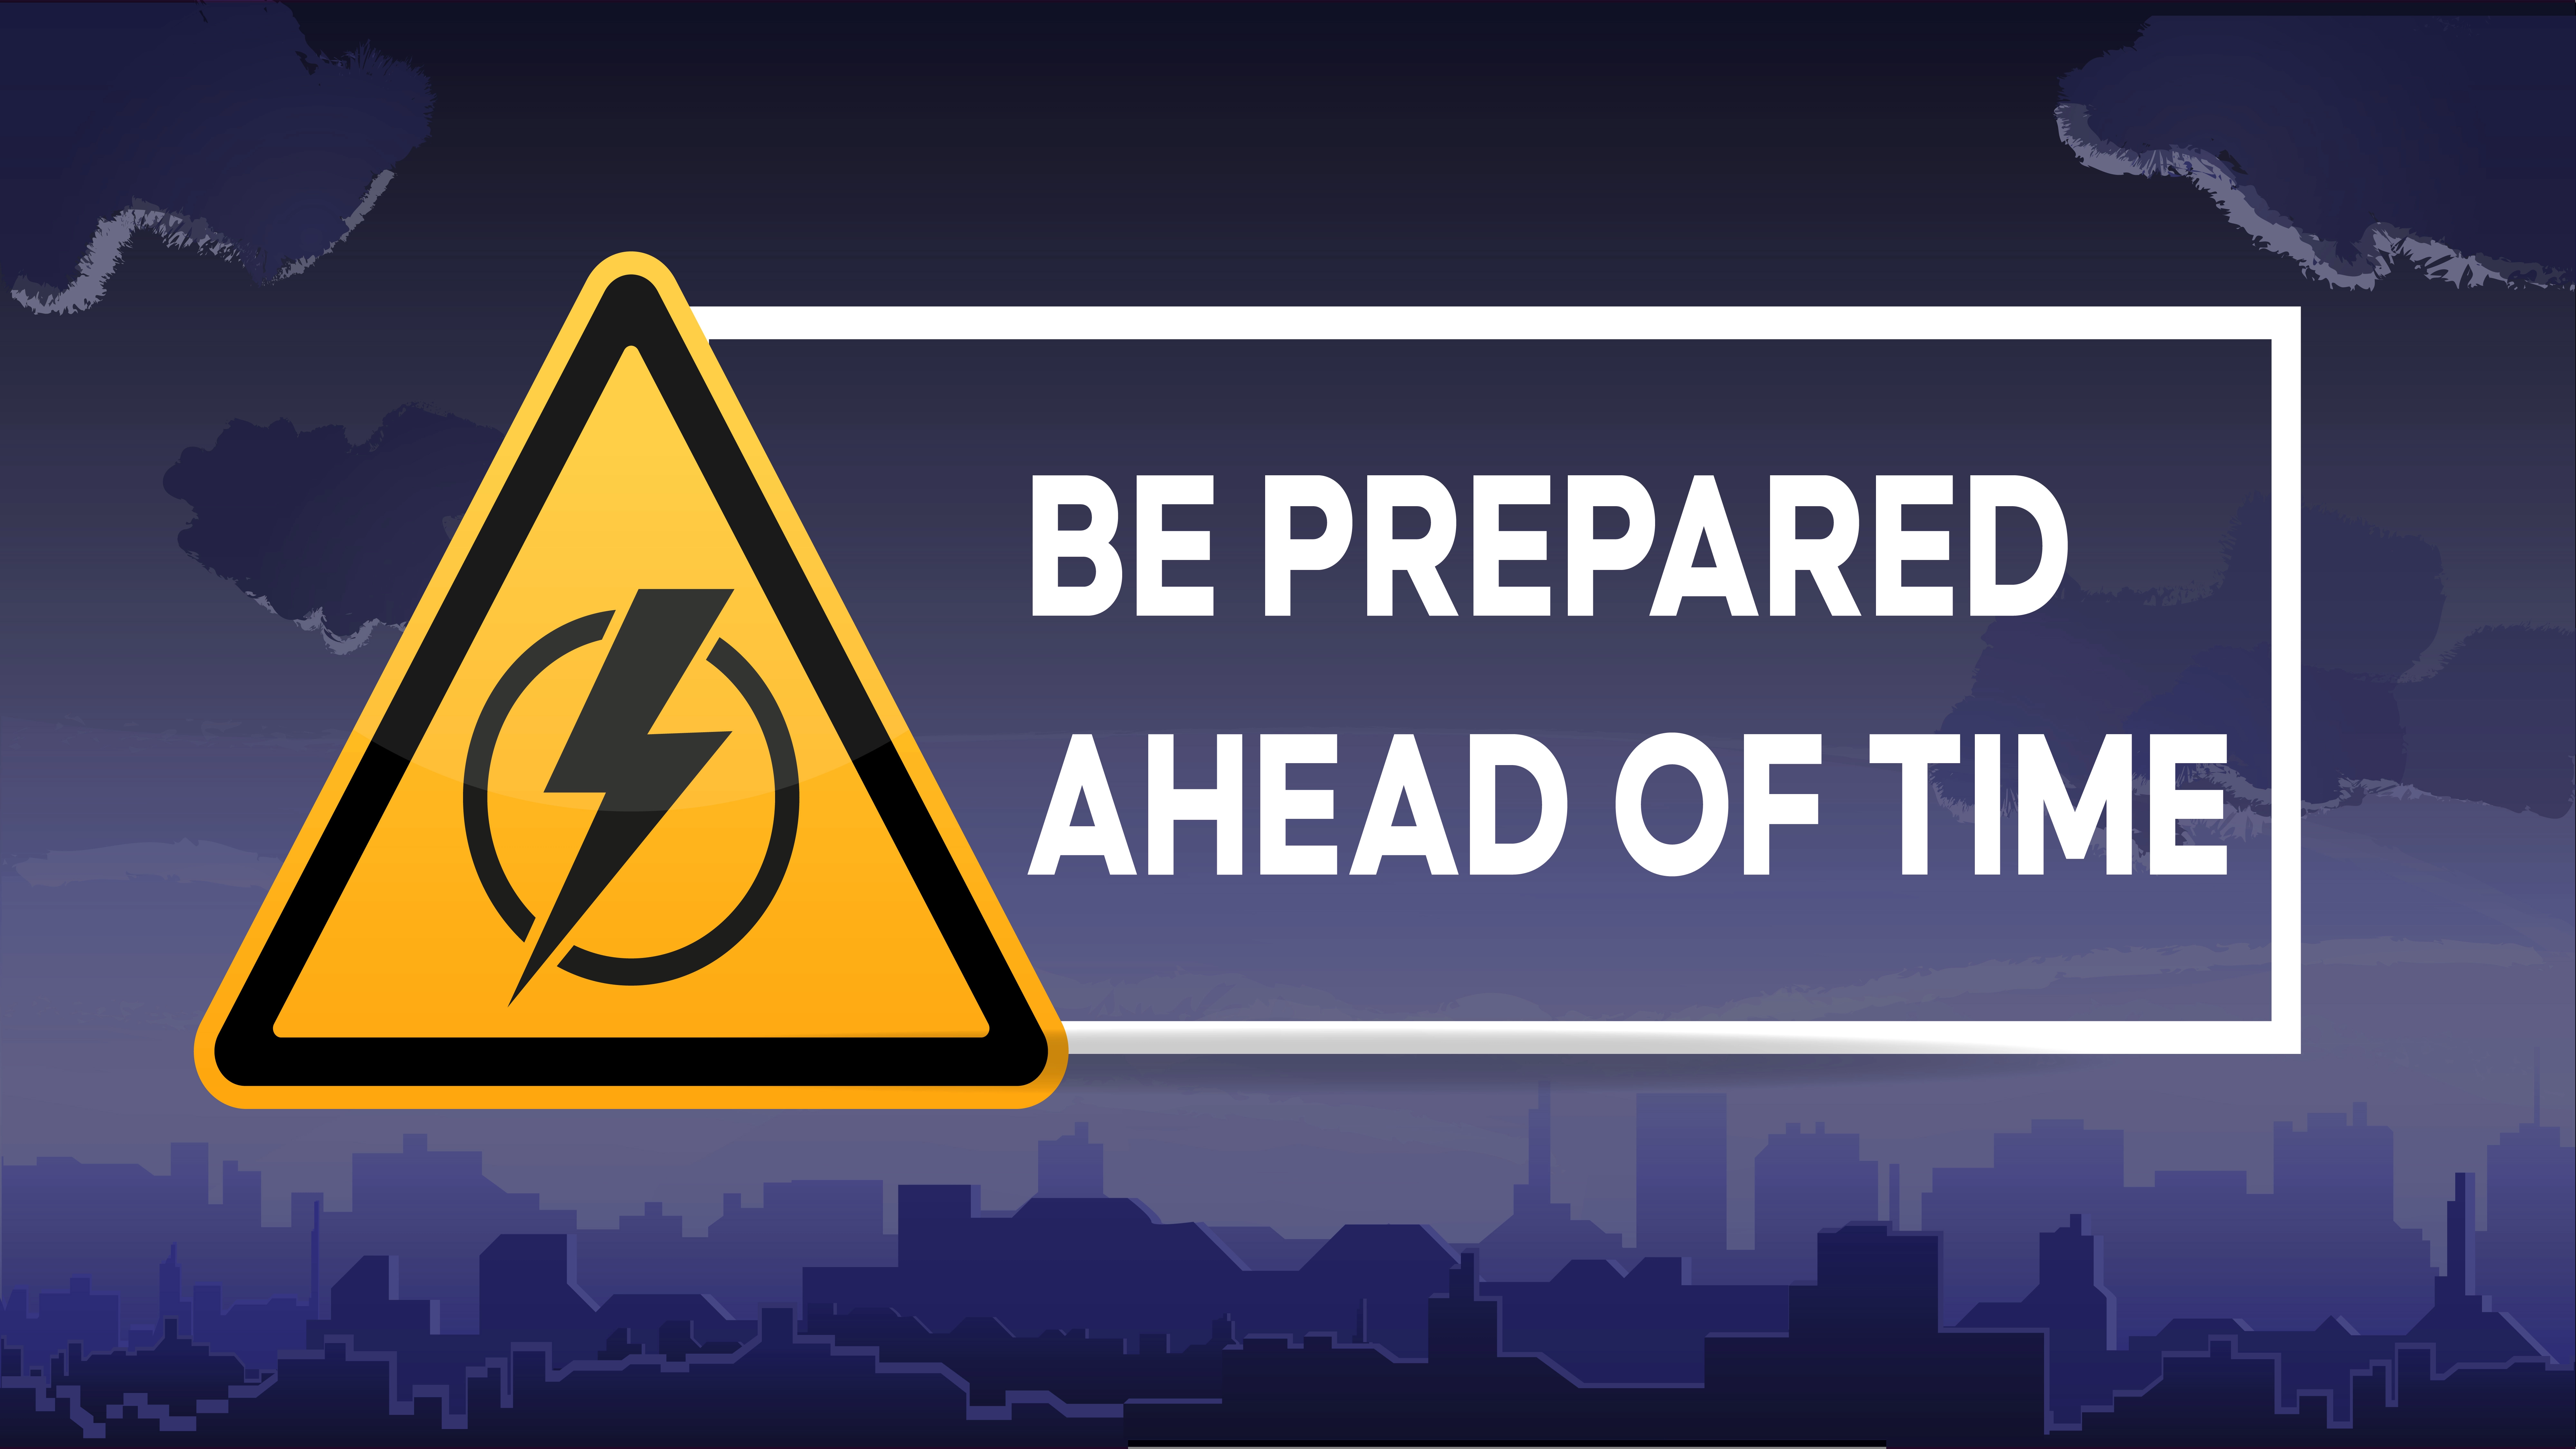 Looking Head: Prepare for the Next Power Outage Now to Protect Your Home and Loved Ones